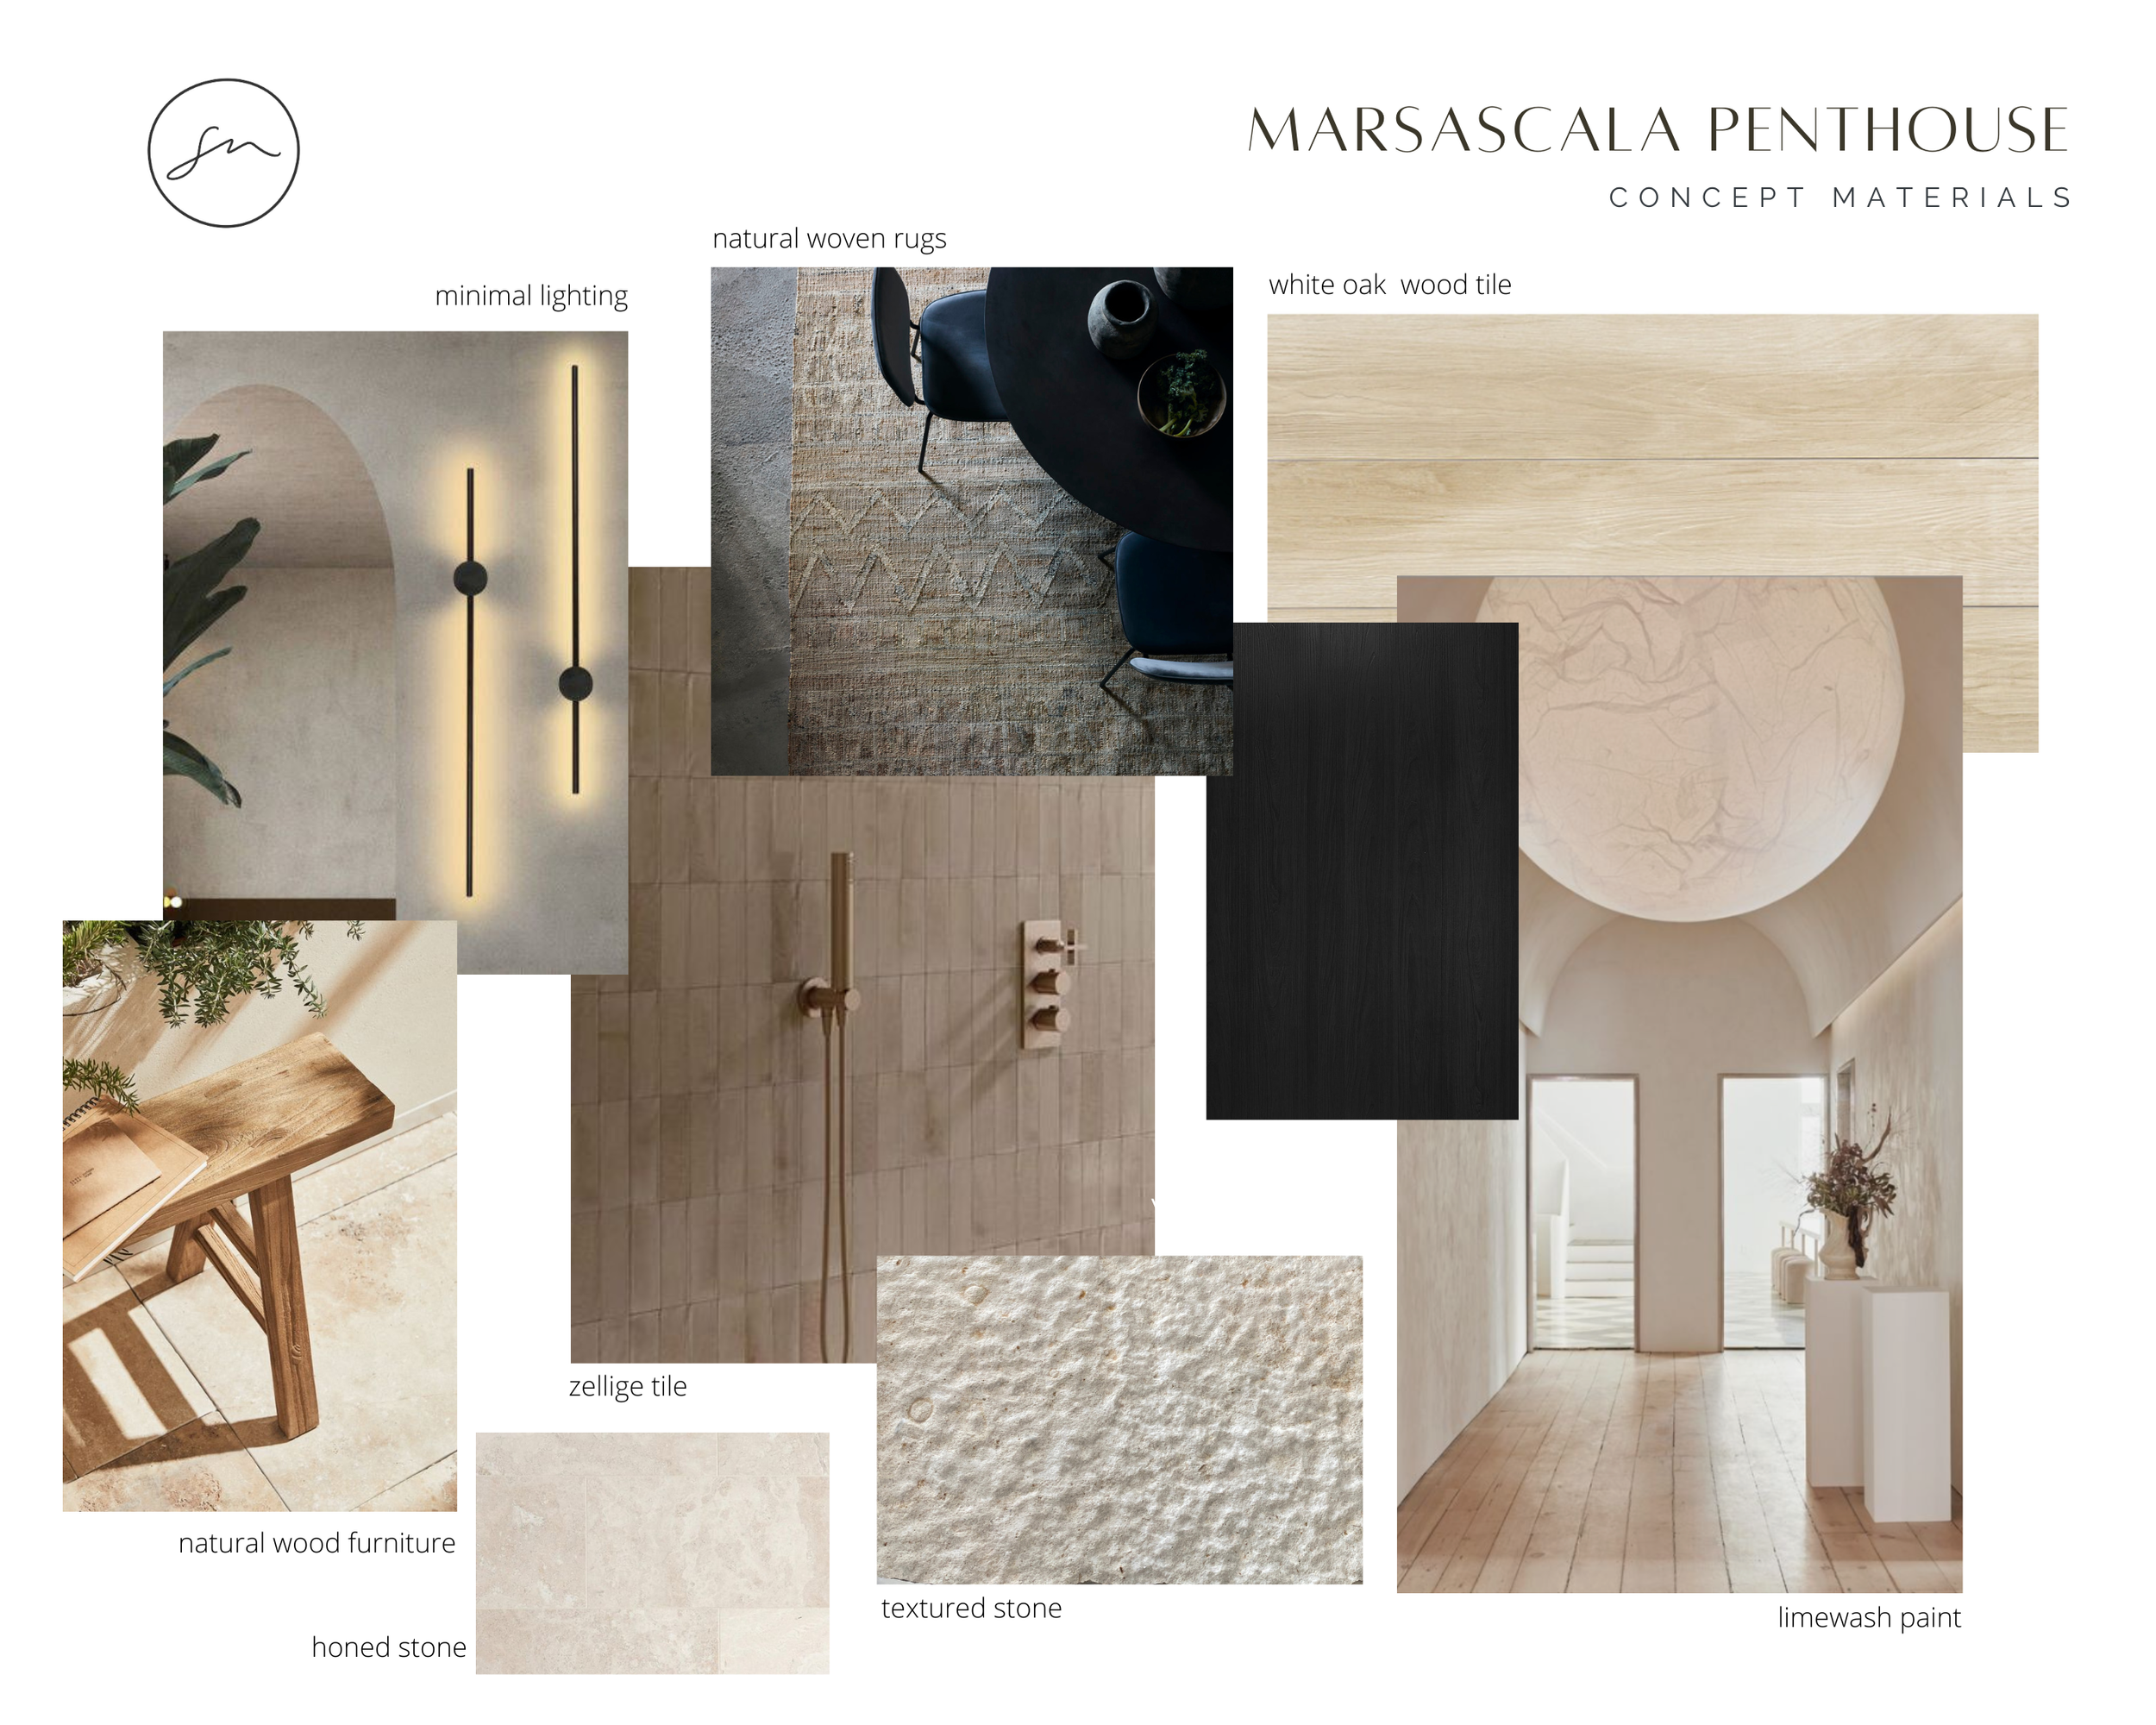 design phase - initial concept mood board